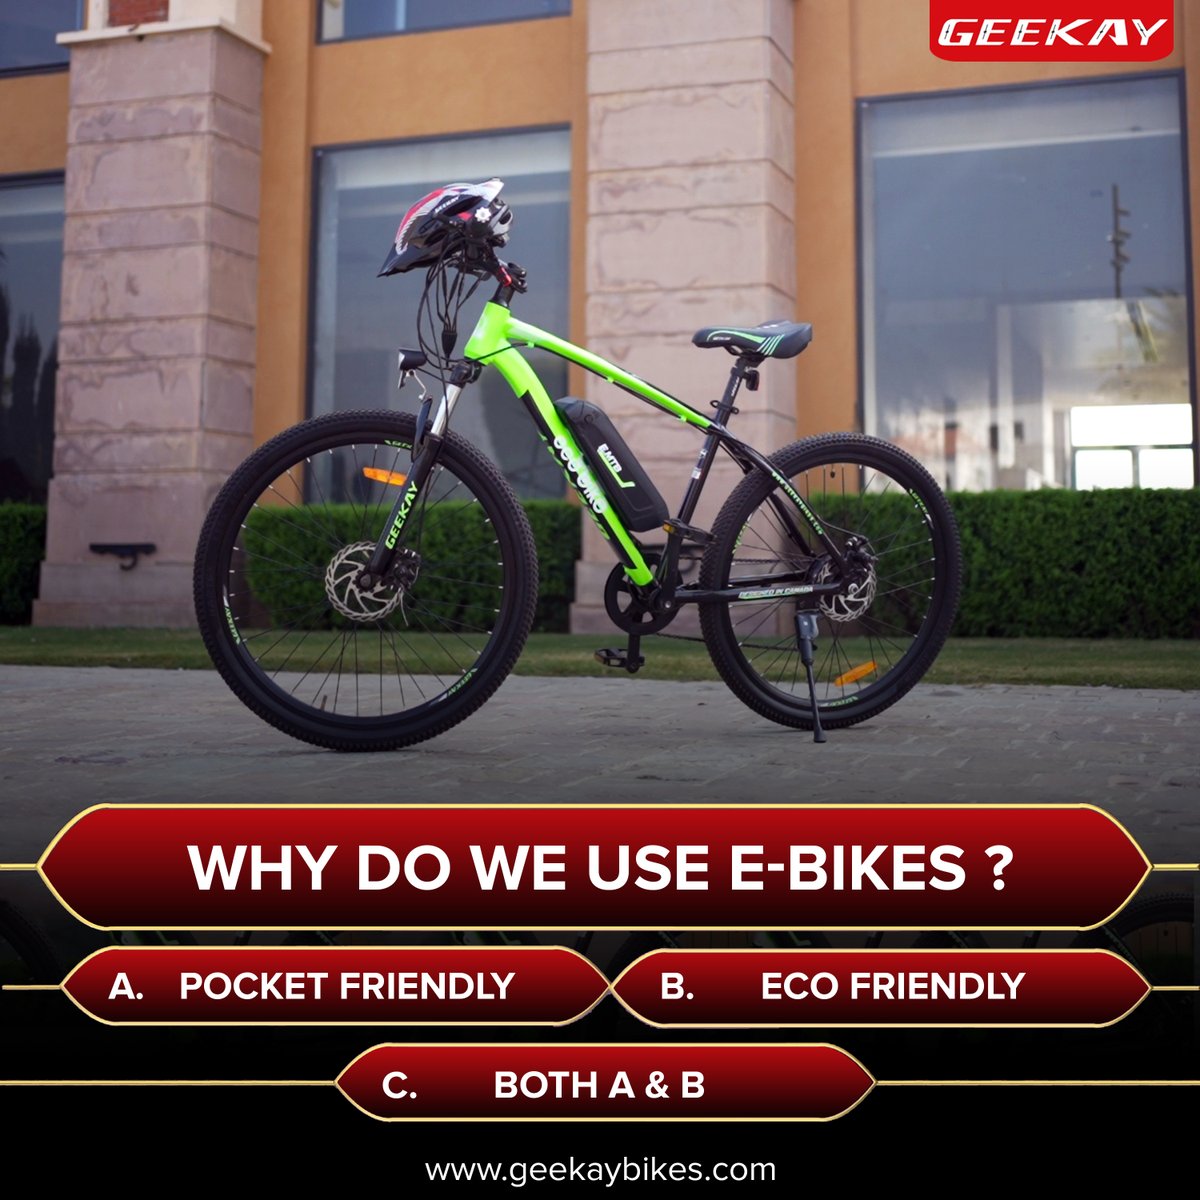 Tell us your answer in the comments👇
.
Order Now: geekaybikes.com/products/eco-b…
.
#ebike #ebikes #pocketfriendly #pocketfriendlyprices #ecofriendly #ecofriendlyproducts #ecofriendlyproduct #ecobike #ecobikes #electricbike #electricbikes #both #answers #AnswerChallenge #Answer #answer